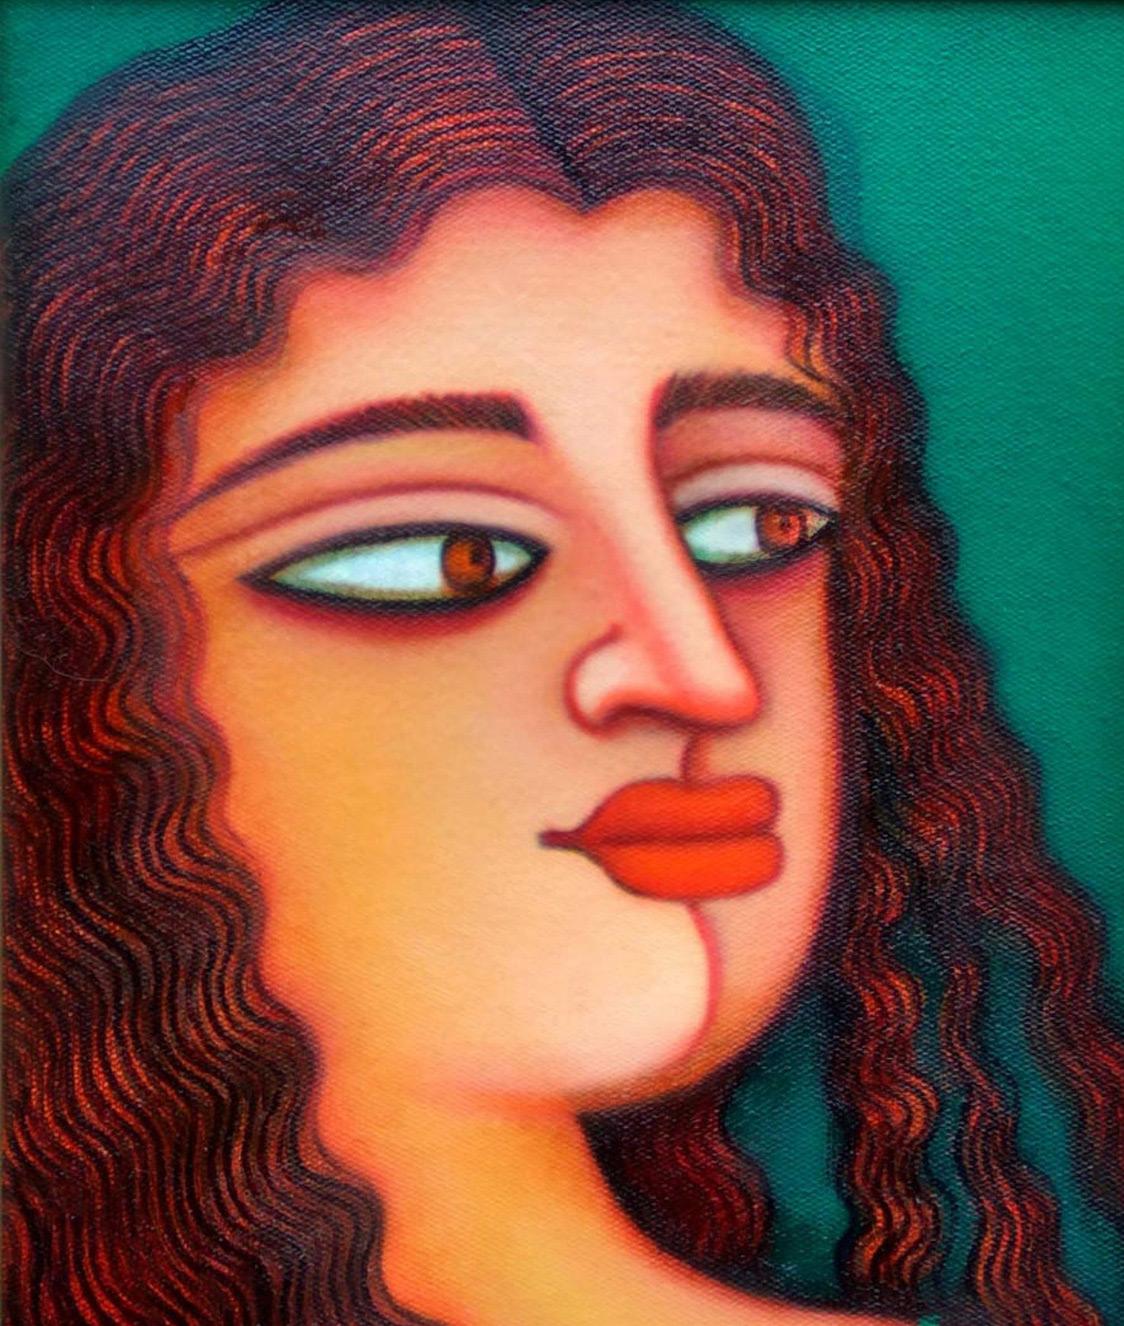 Indian Women, Acrylic on canvas, Red, Green, Brown by Indian Artist 